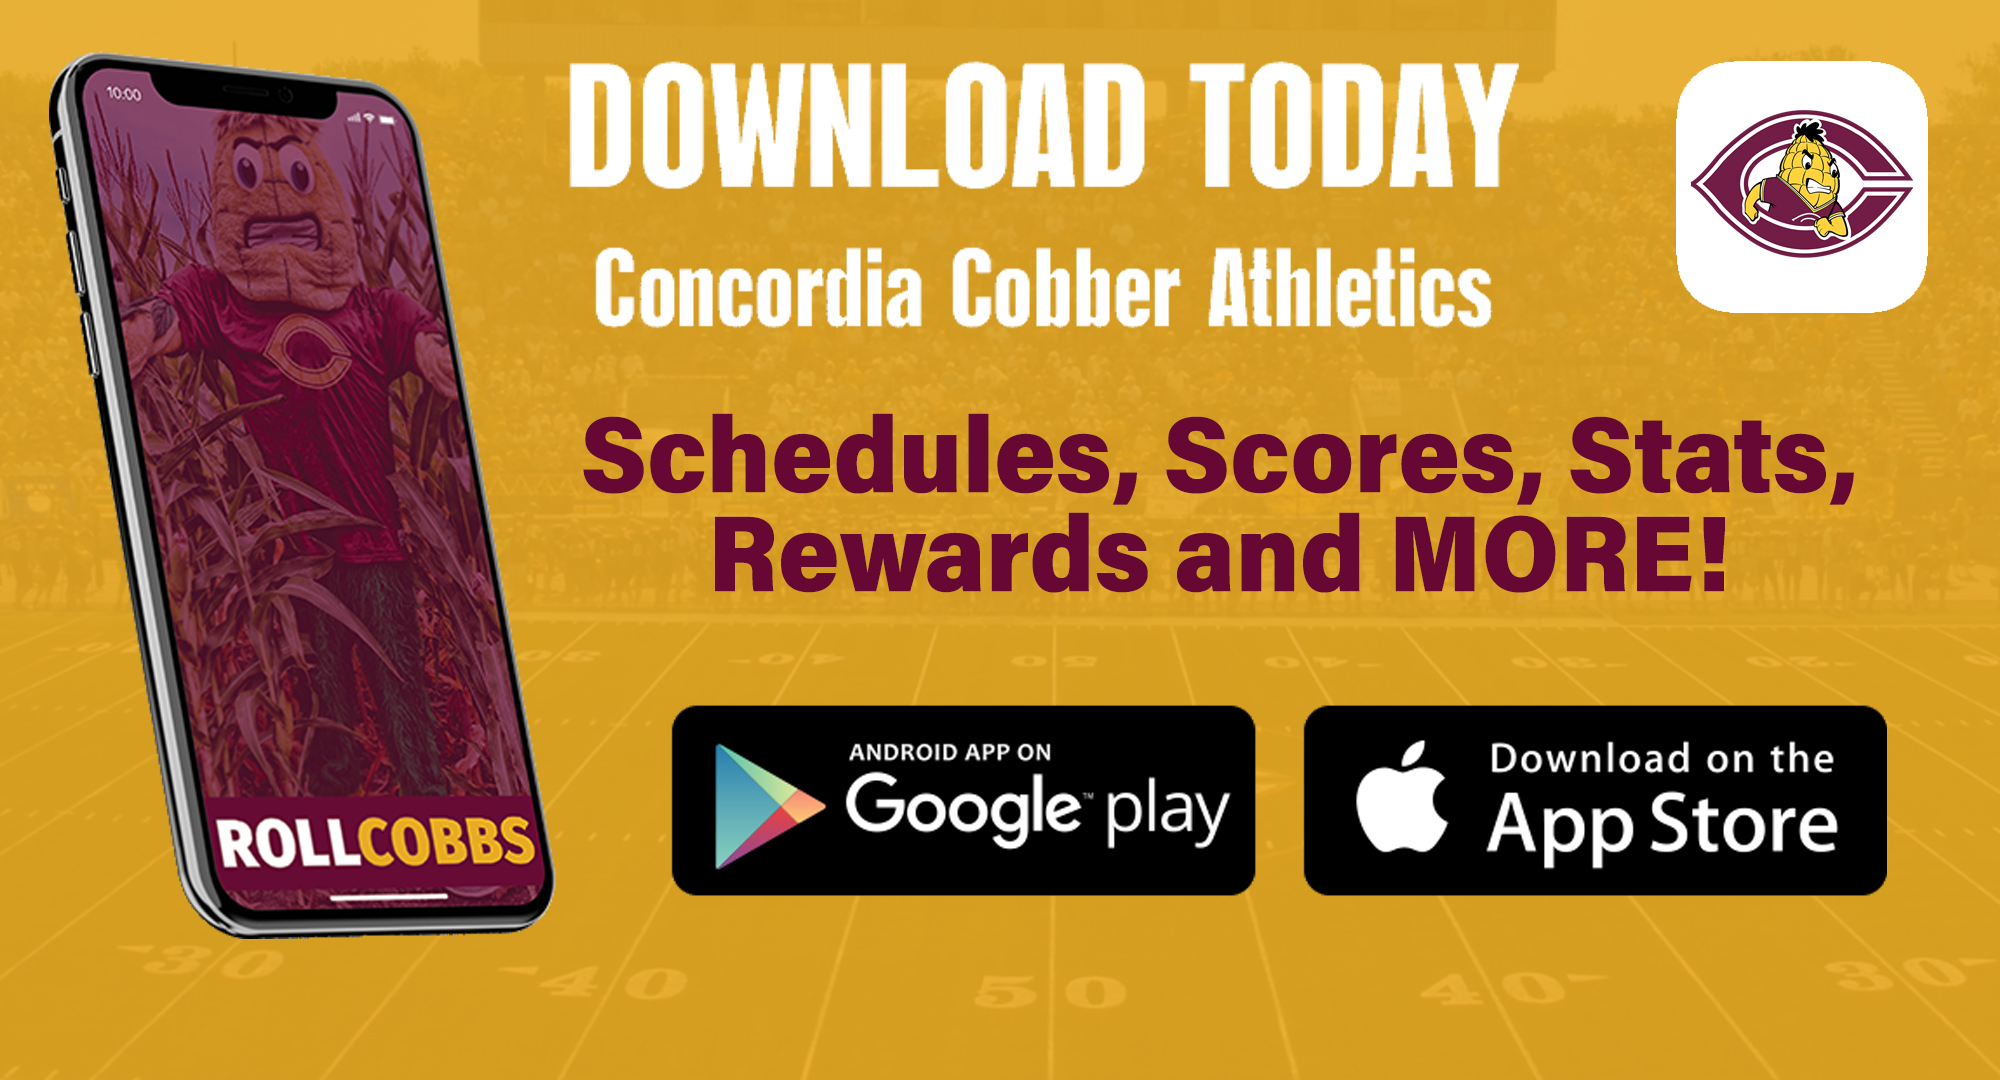 The Cobber Athletics app will allow fans to keep up with all the teams, schedules, scores and news and earn rewards towards prizes!